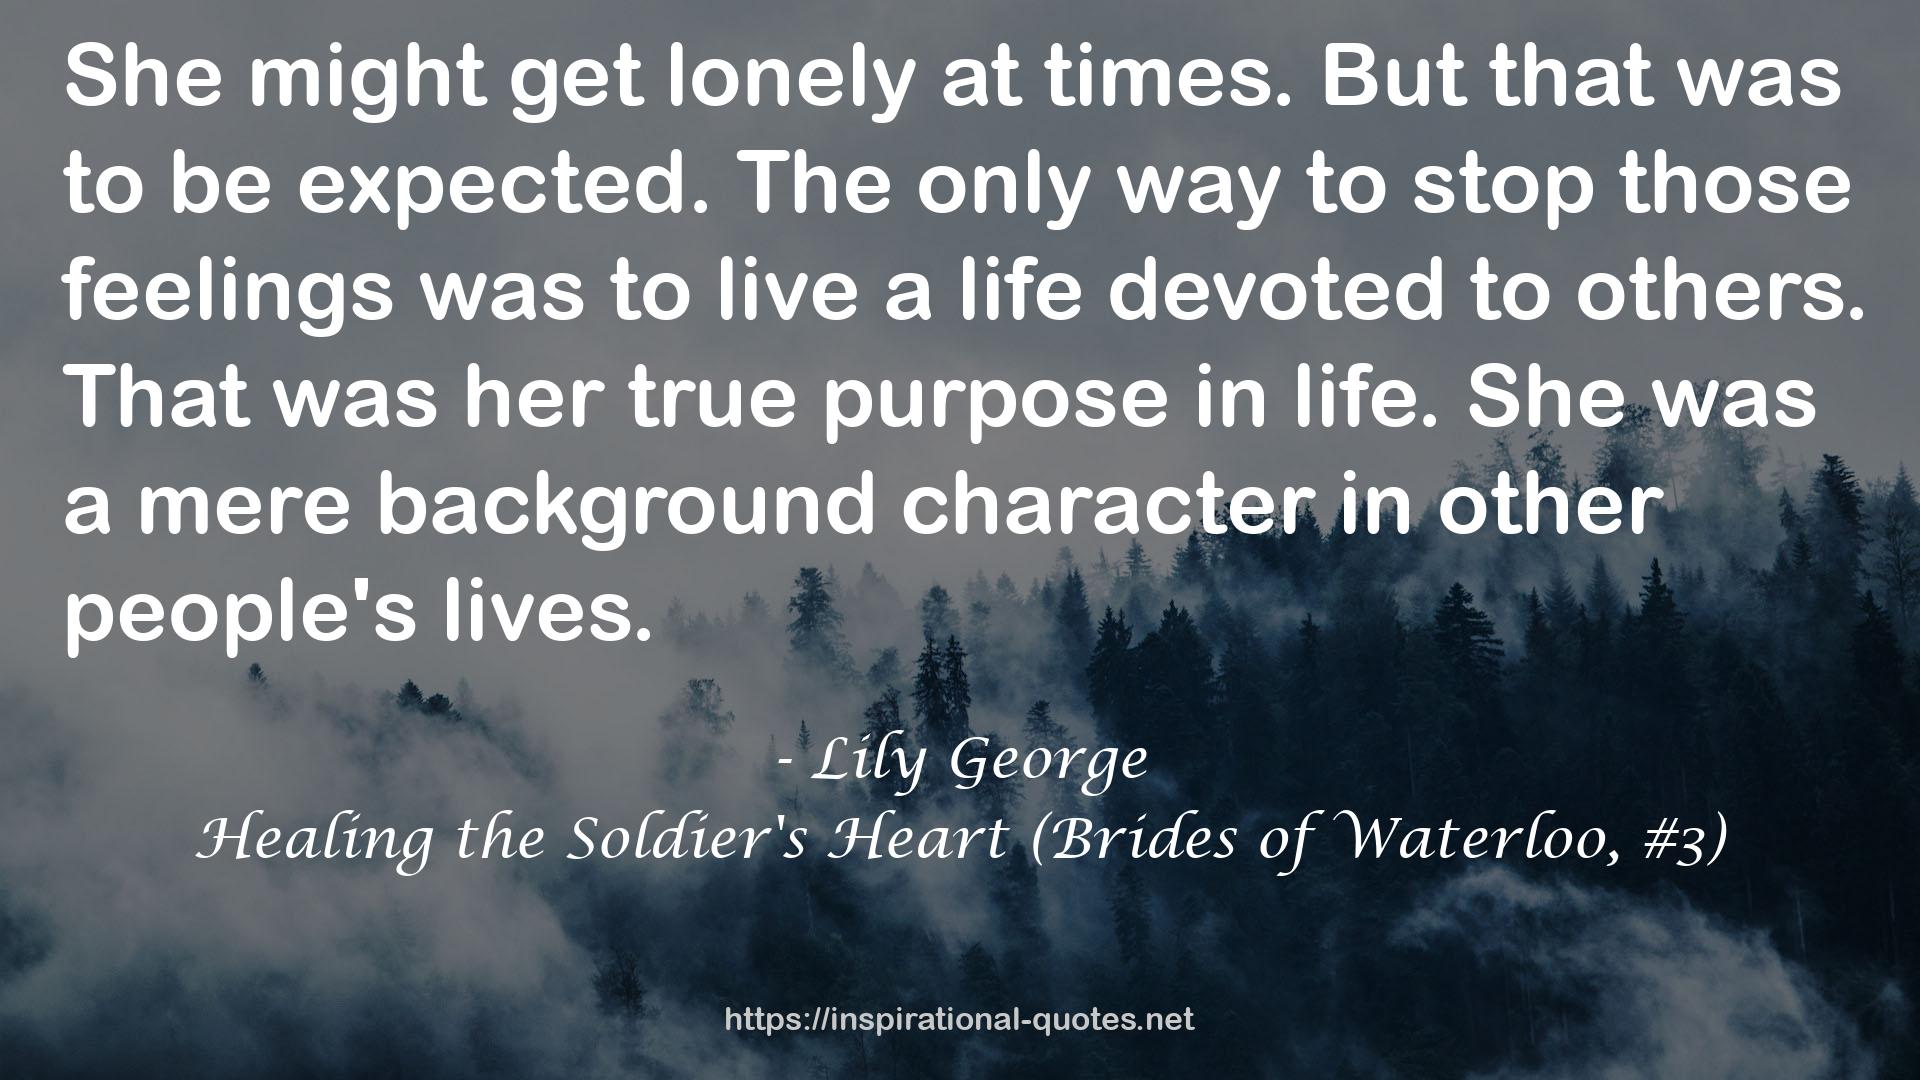 Healing the Soldier's Heart (Brides of Waterloo, #3) QUOTES